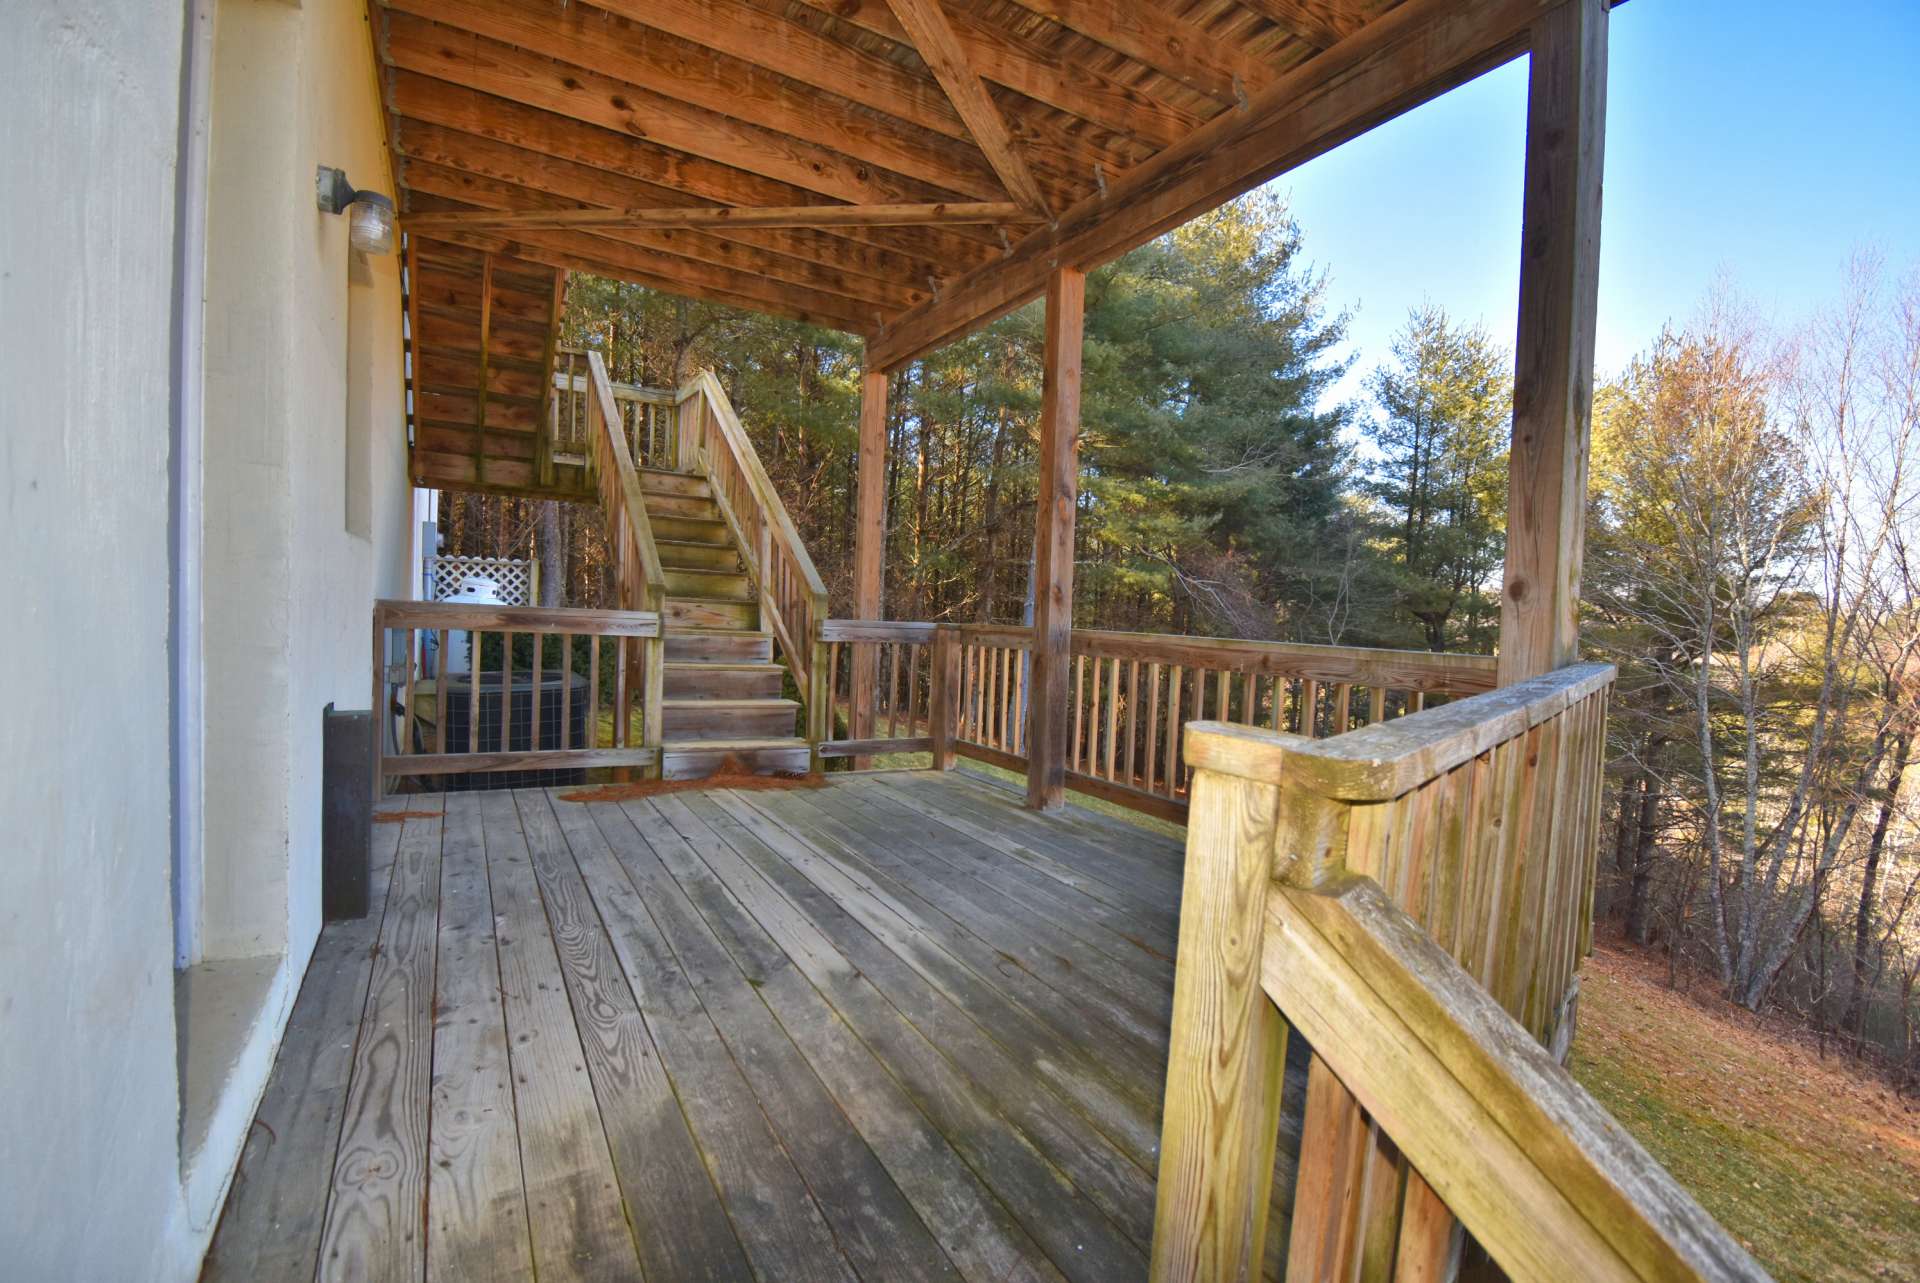 The lower level also offers access to the lower covered deck where you will enjoy the mountain views as well as views of the neighboring community pond.